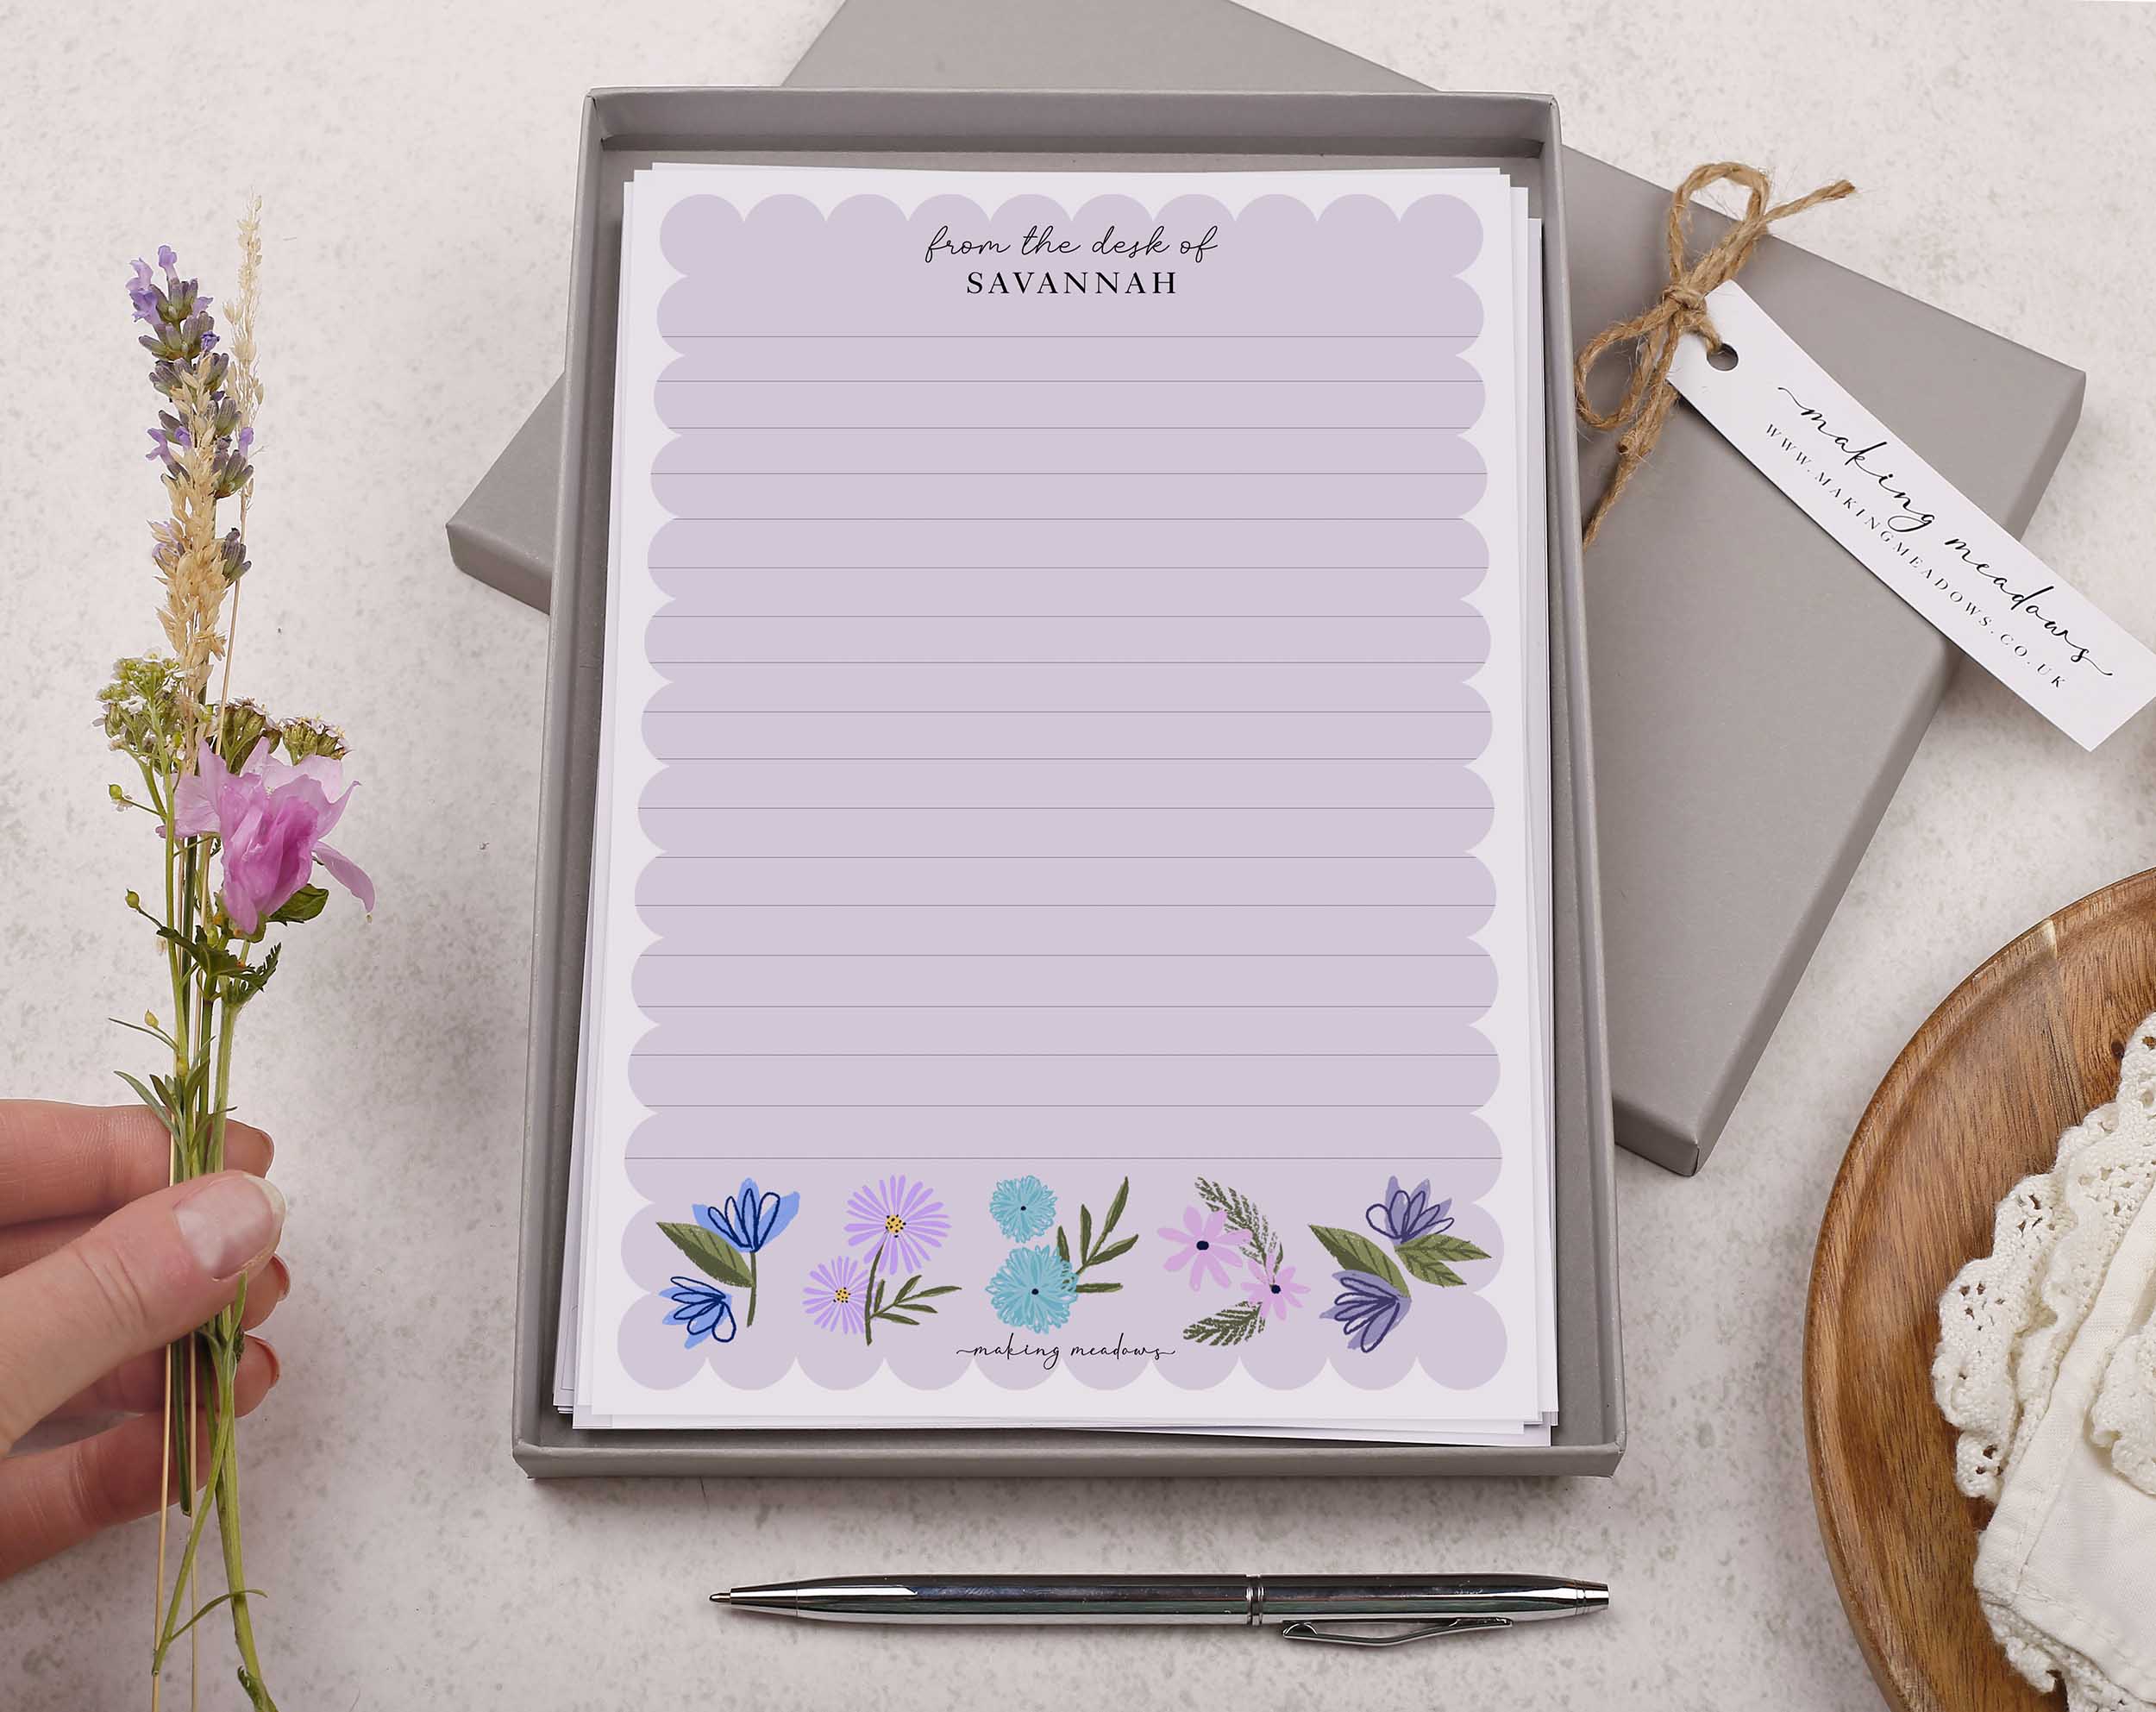 Premium personalised A5 letter writing paper set with beautiful lilac flowers along the bottom and a super cute scalloped edge border. 